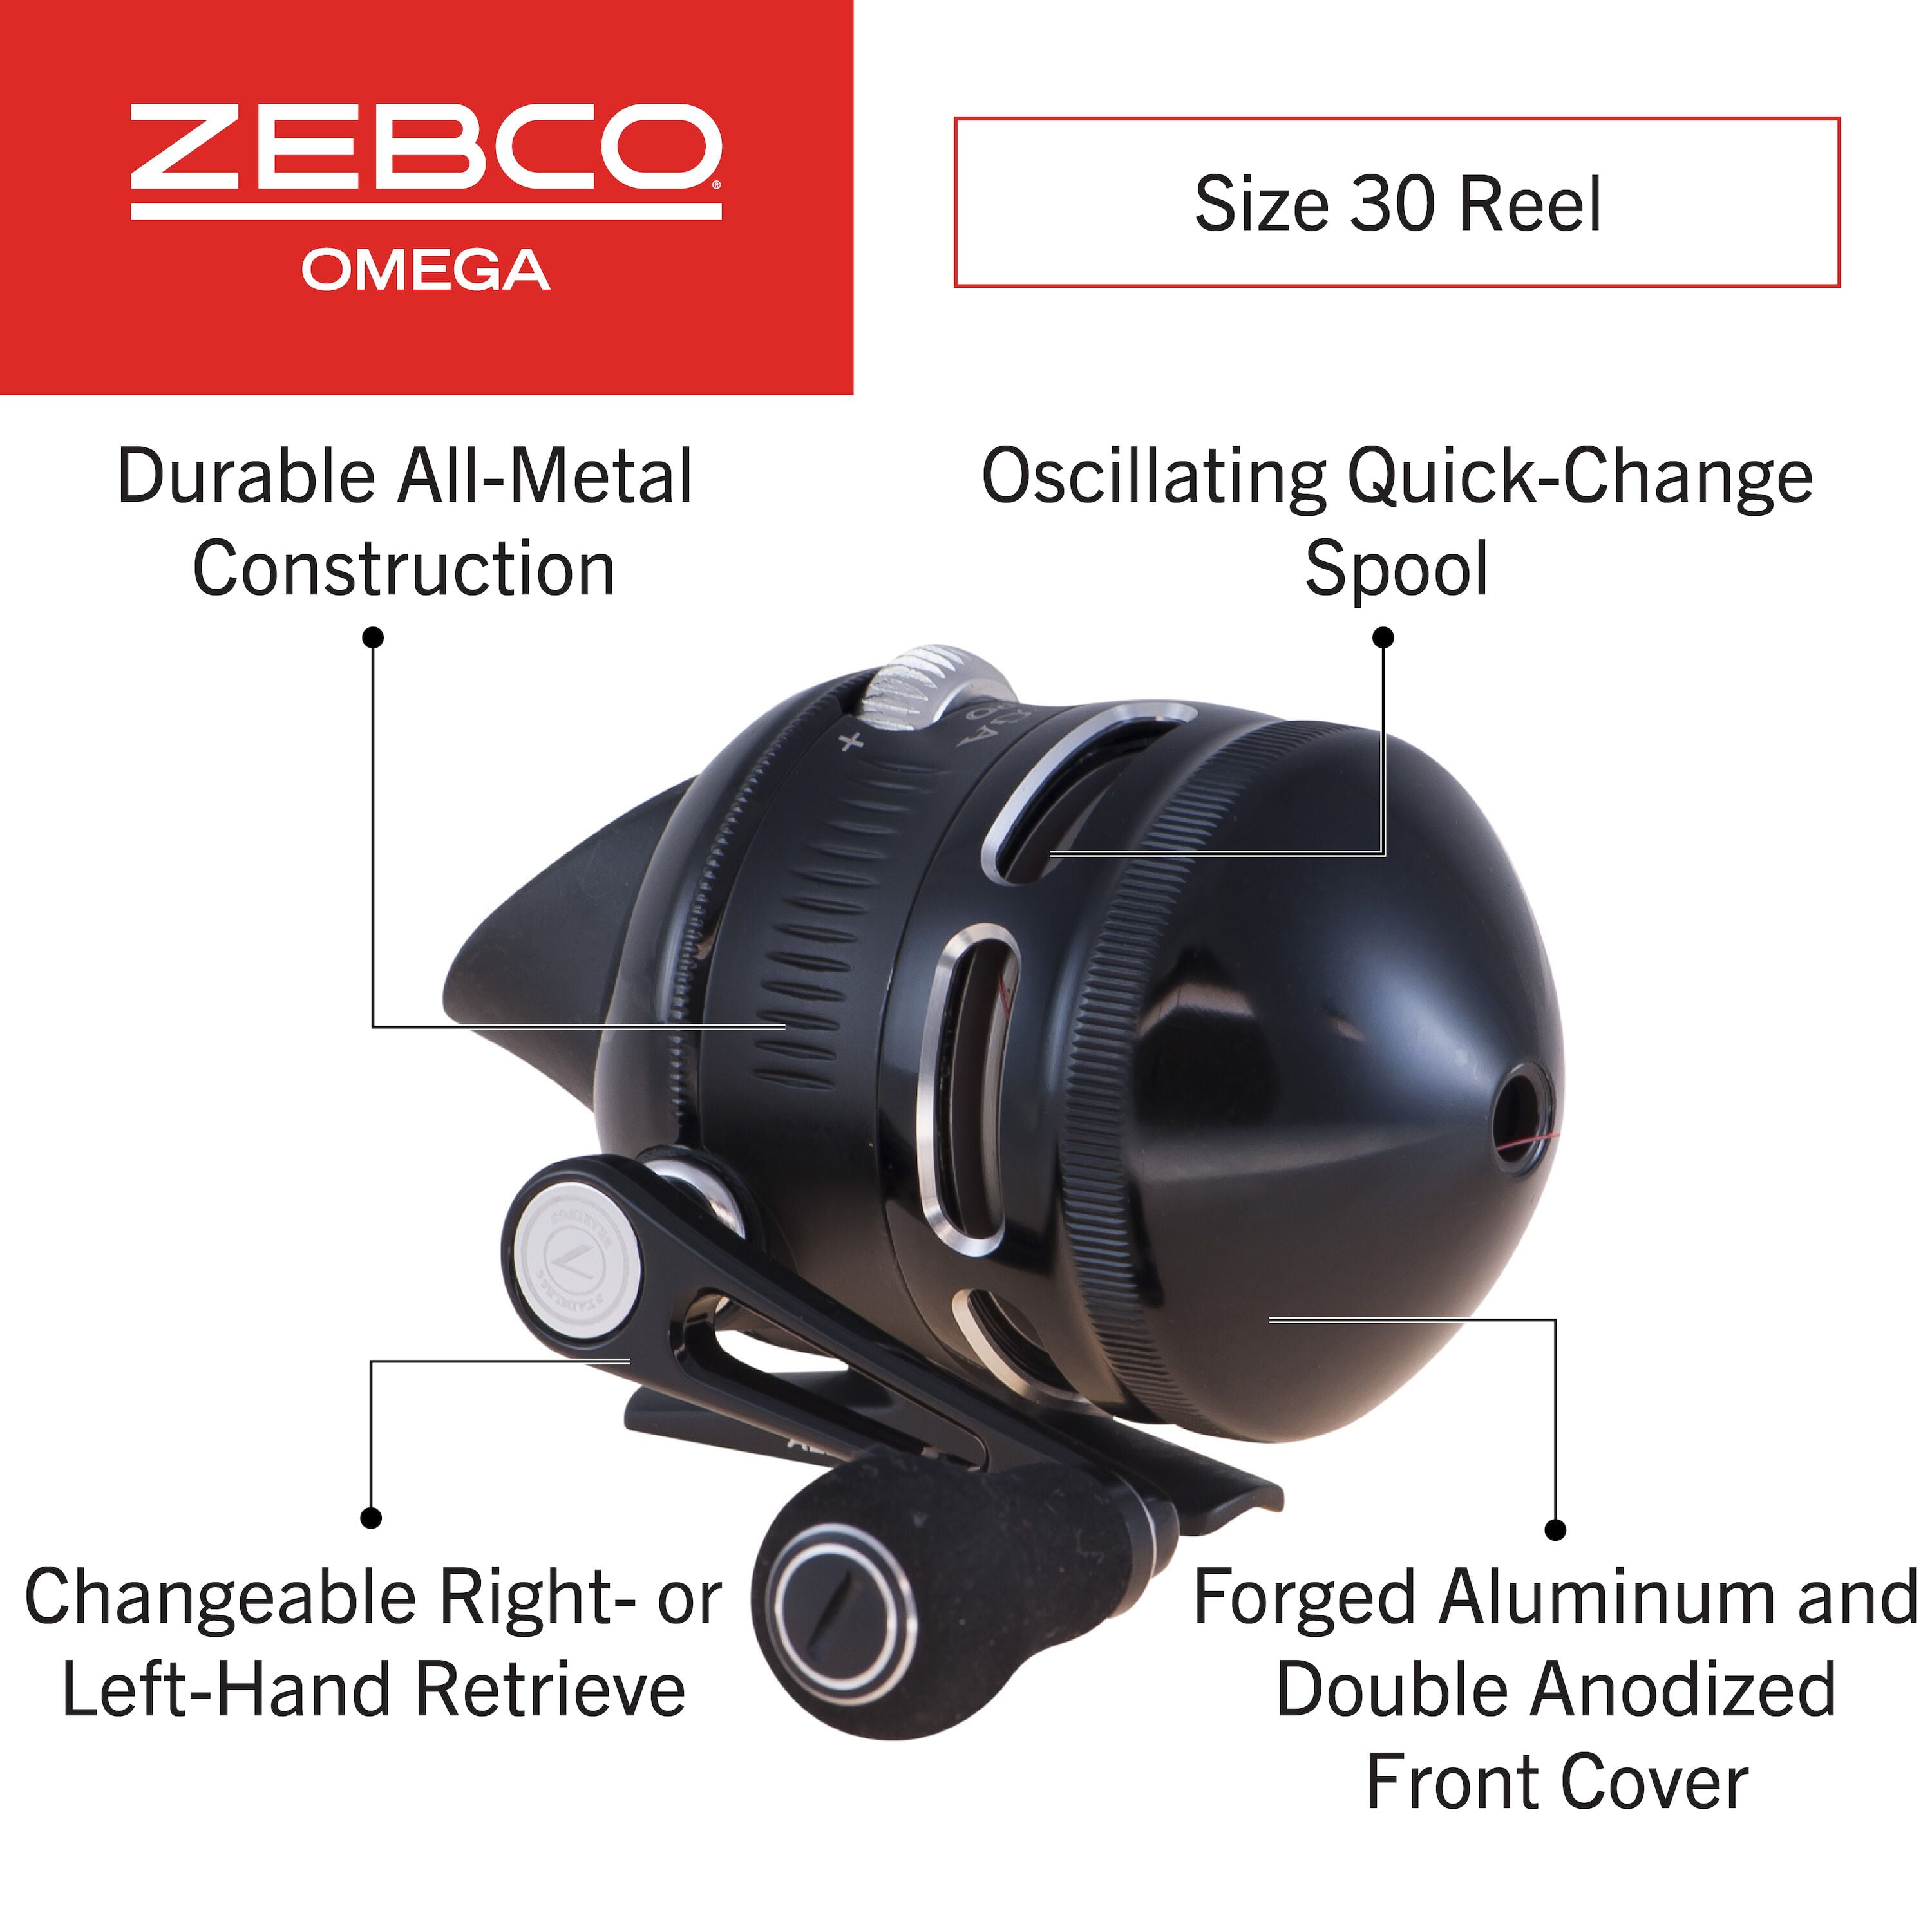 Zebco Omega Pro Spincast Fishing Reel, Size 30 Reel, Changeable Right or  Left-Hand Retrieve, Includes a Spare Spool and an Extra Dual-Paddle Handle